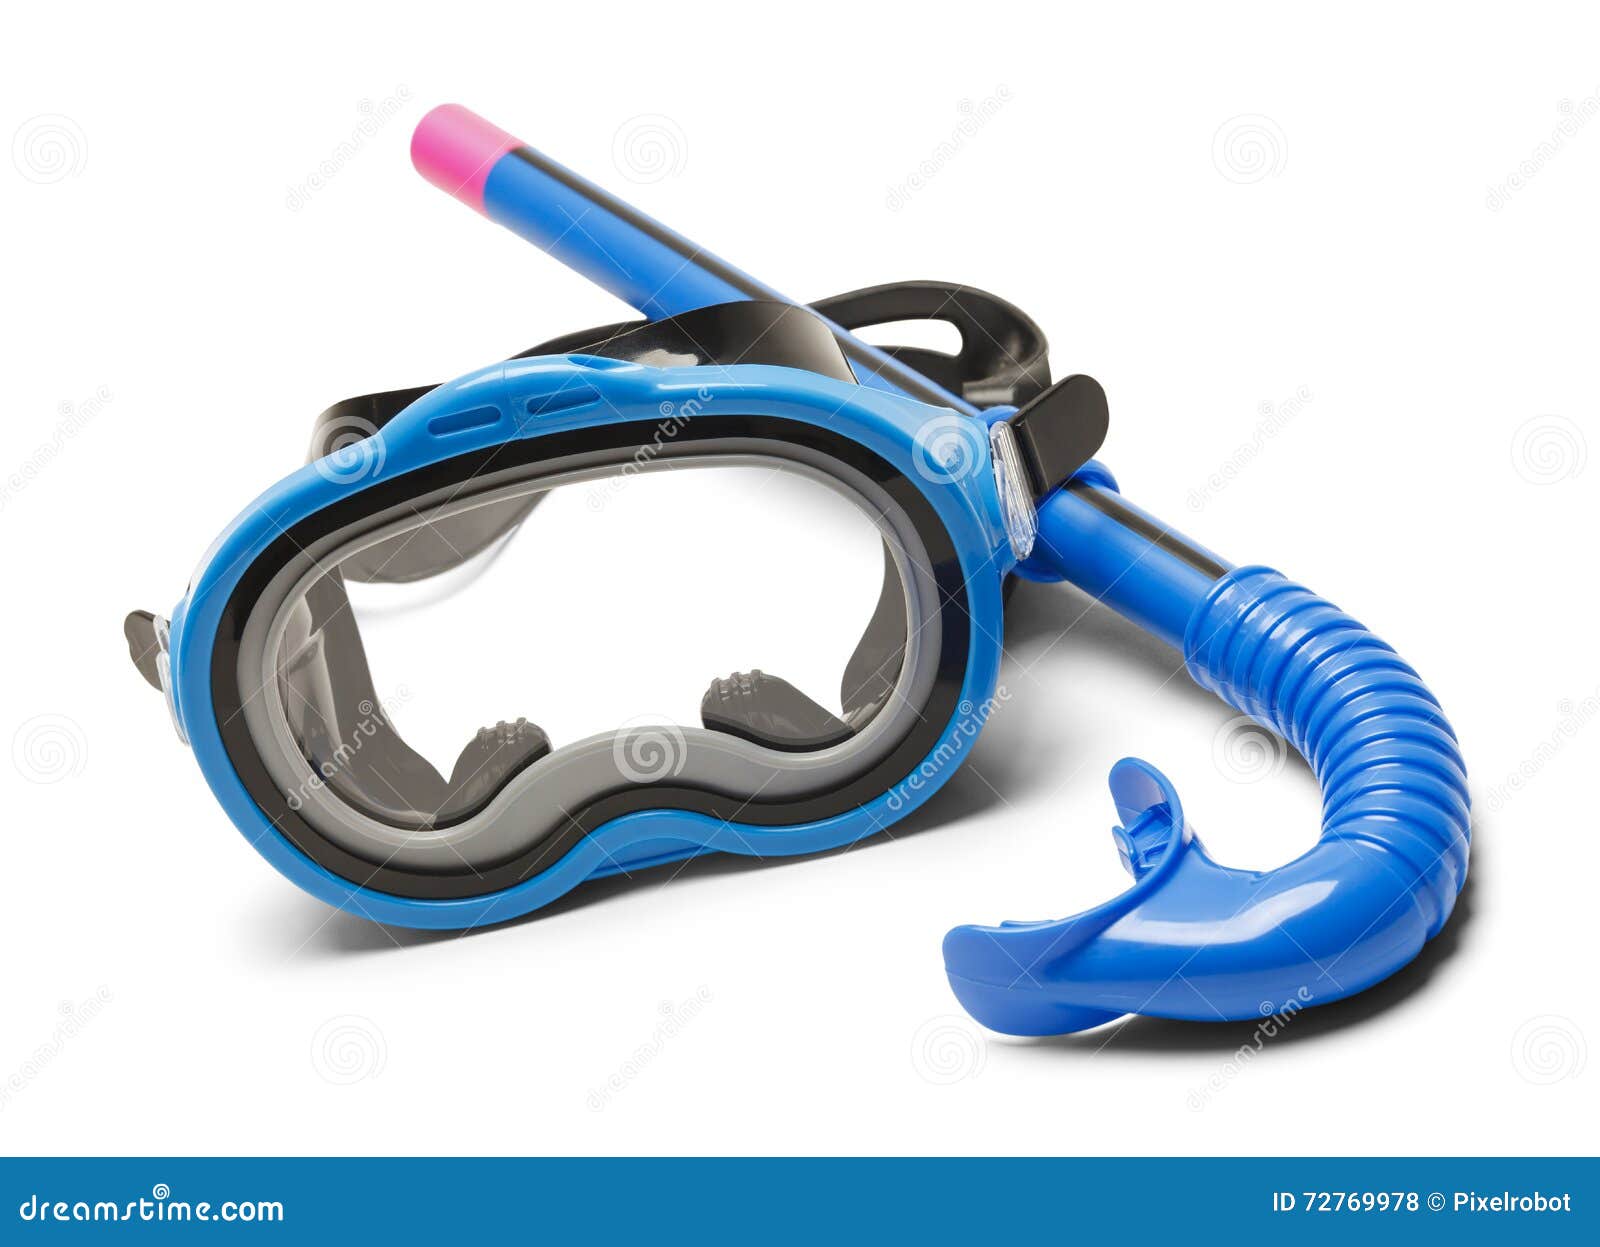 mask and snorkel